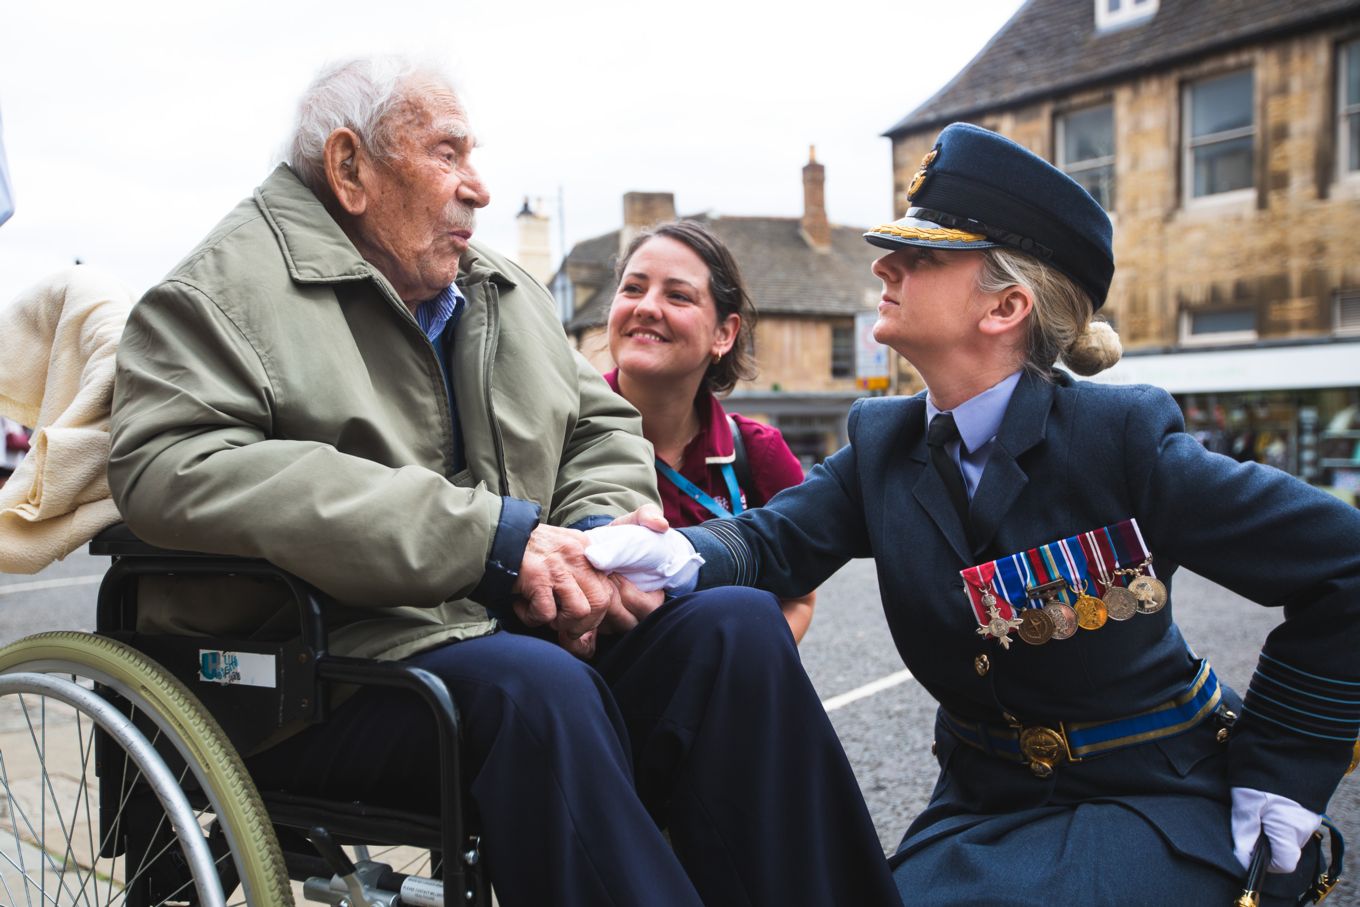 Group Captain Lincoln meets RAF Veteran, 96-year-old Warrant Officer Bert Salvage, formerly of RAF Wittering.